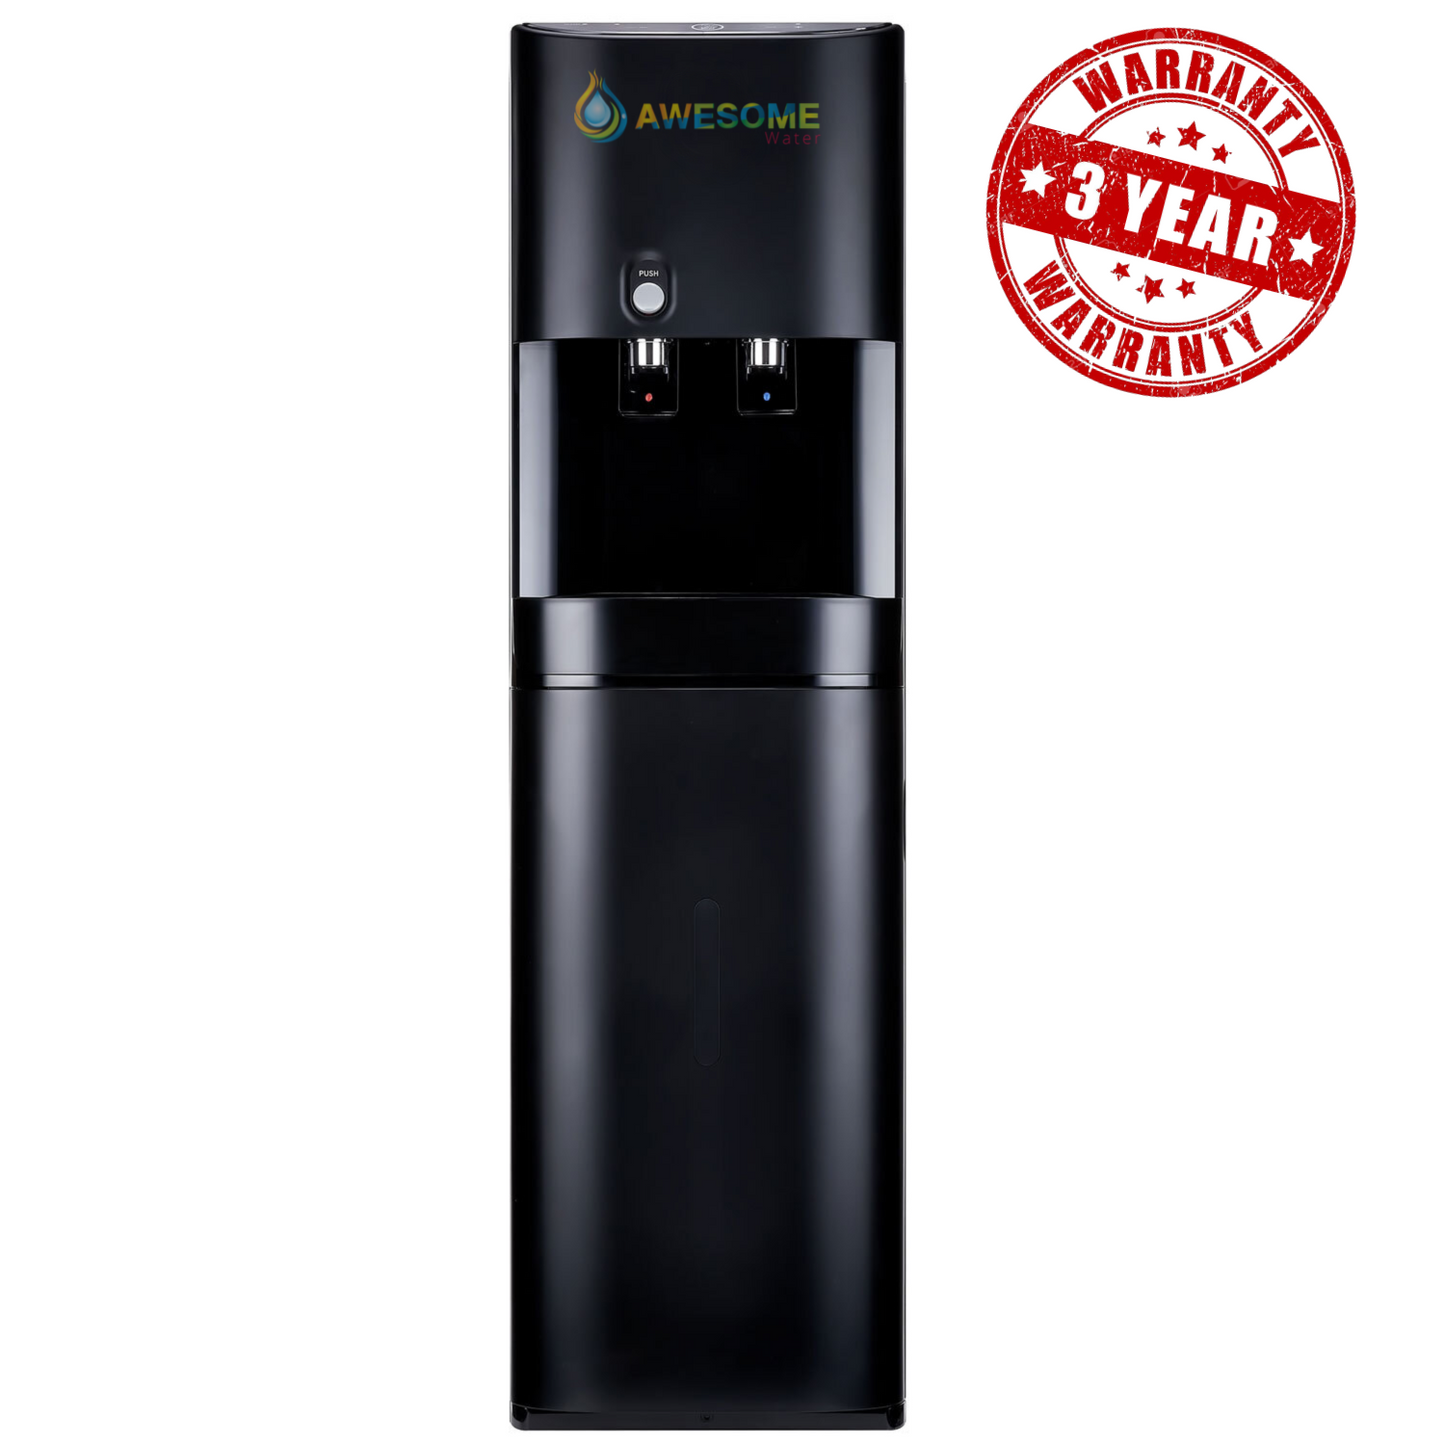 ELITE - BLACK - AUTO FILL (POU) - HOT & COLD - FLOOR STANDING WATER DISPENSER - Awesome Water